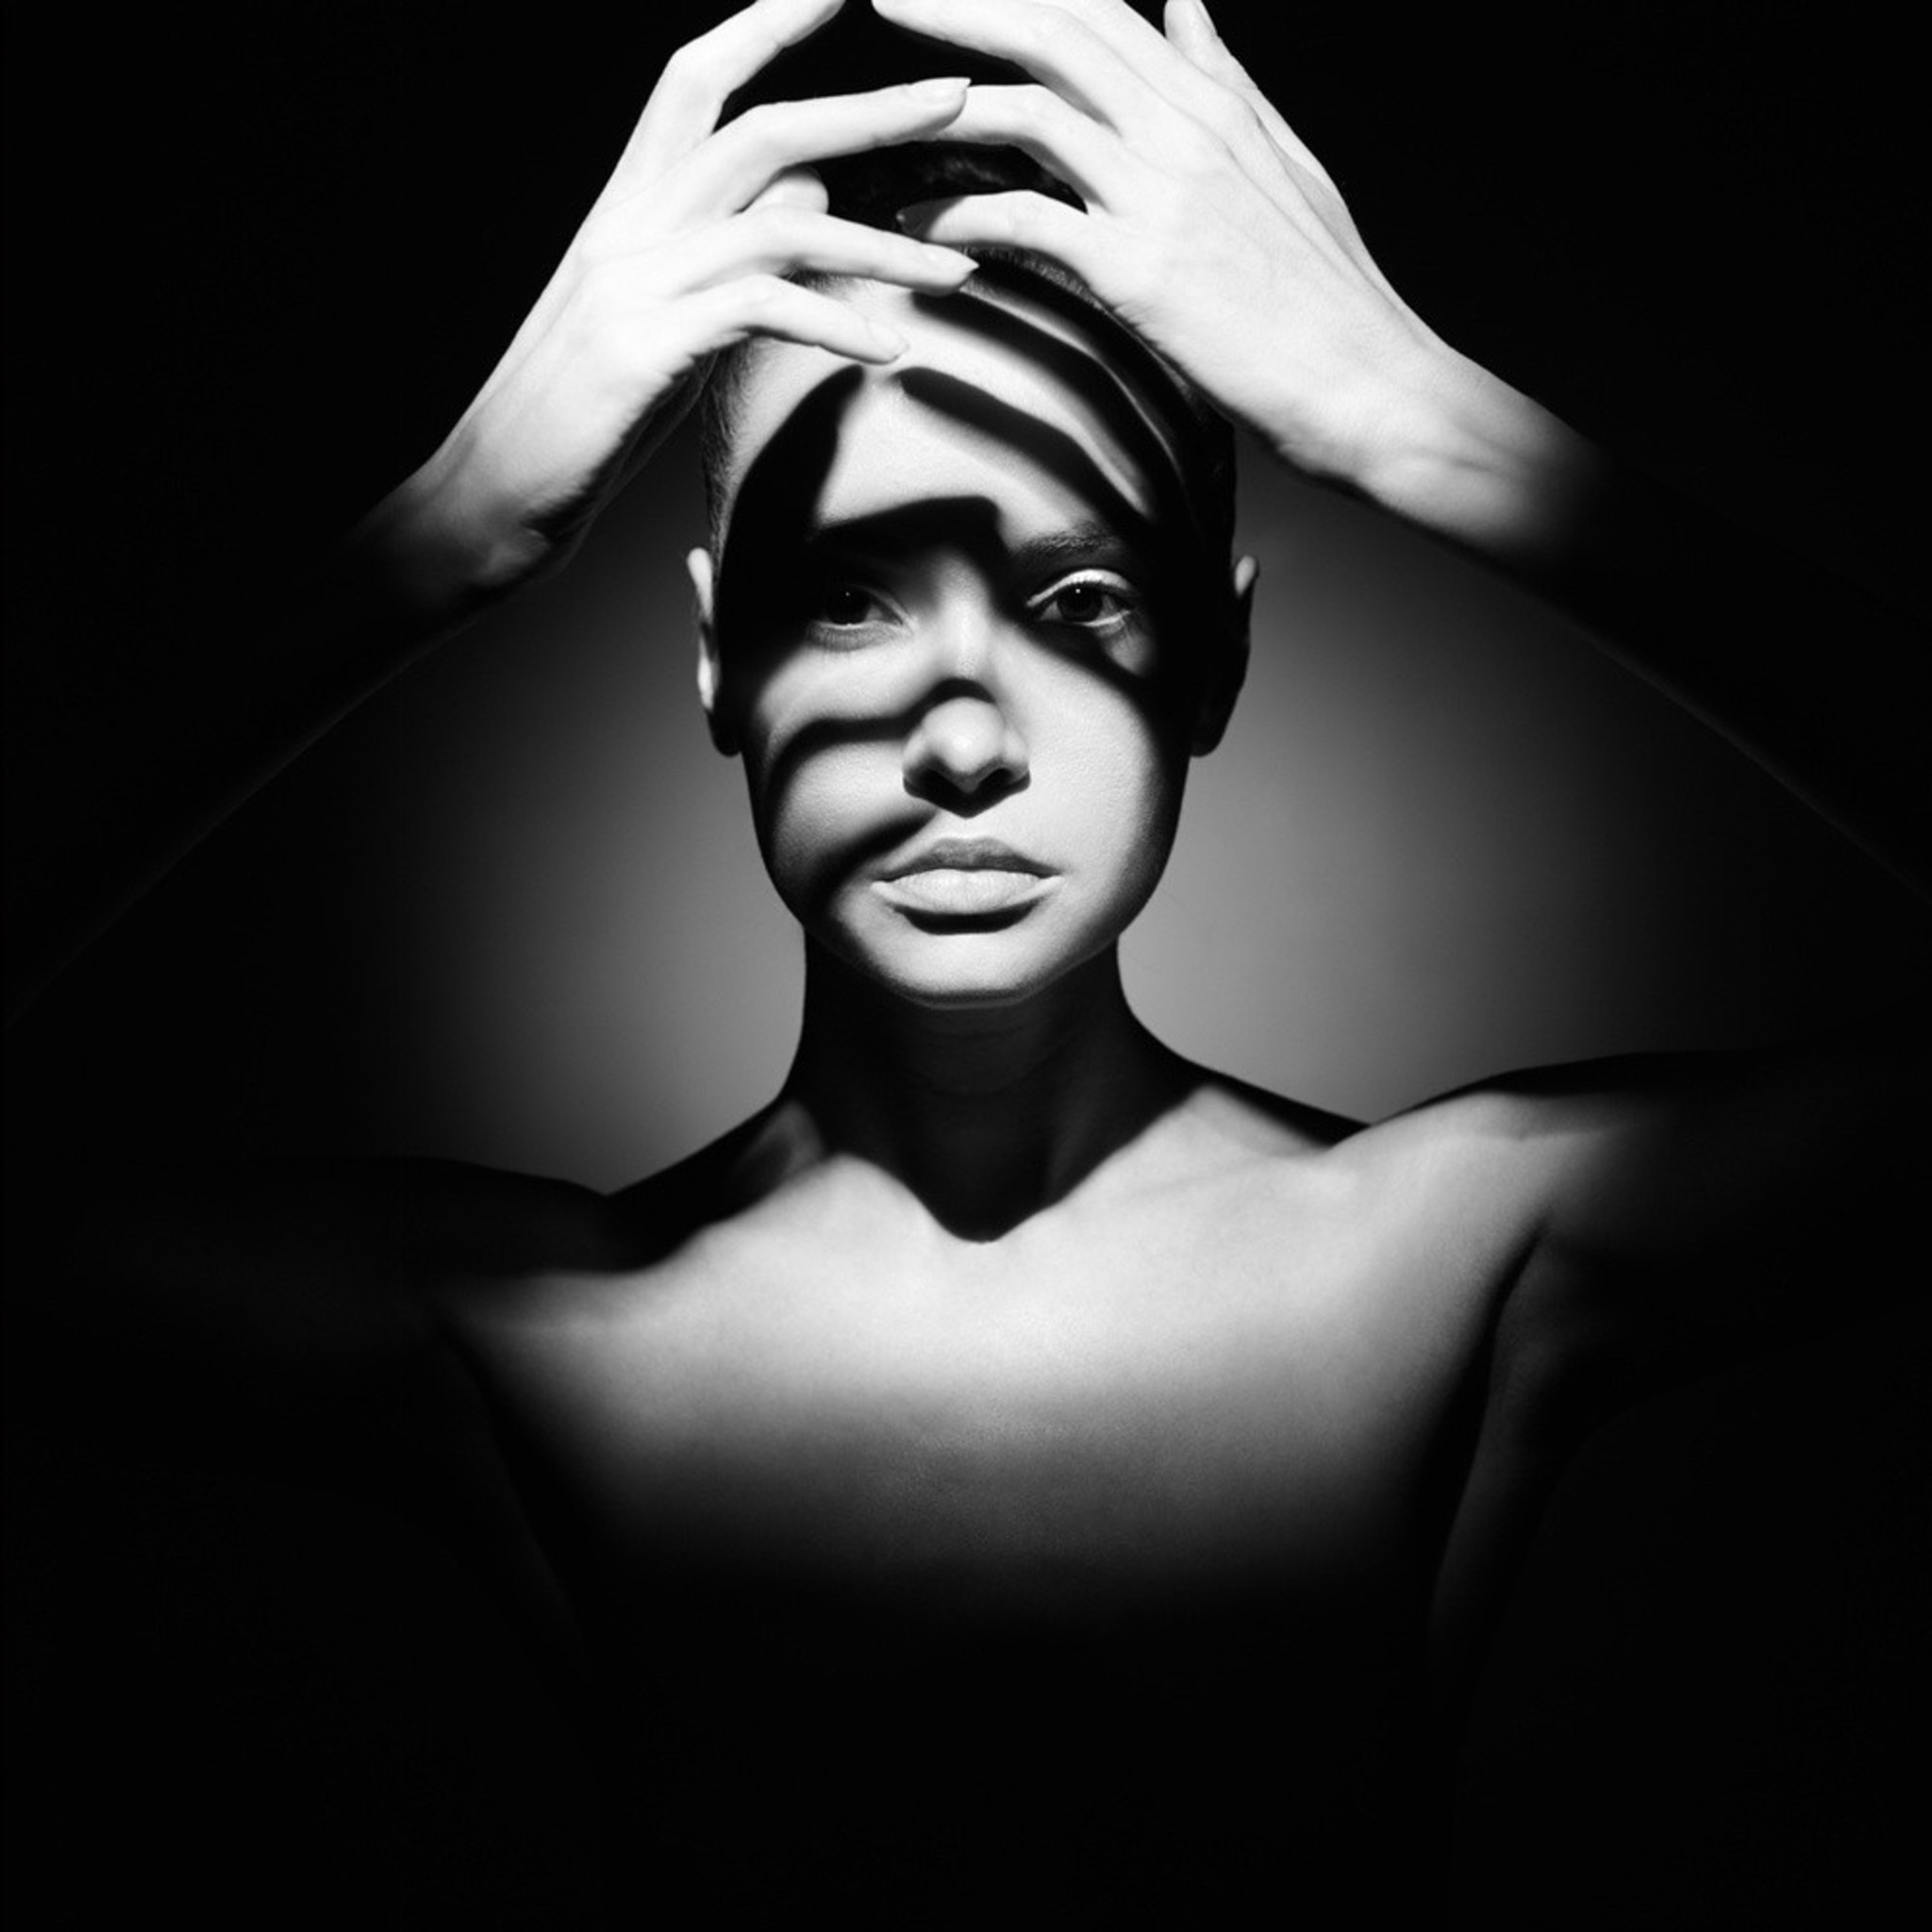 Exhibition of contemporary Russian photographer George Mayer Light. Shadows. Ideal woman